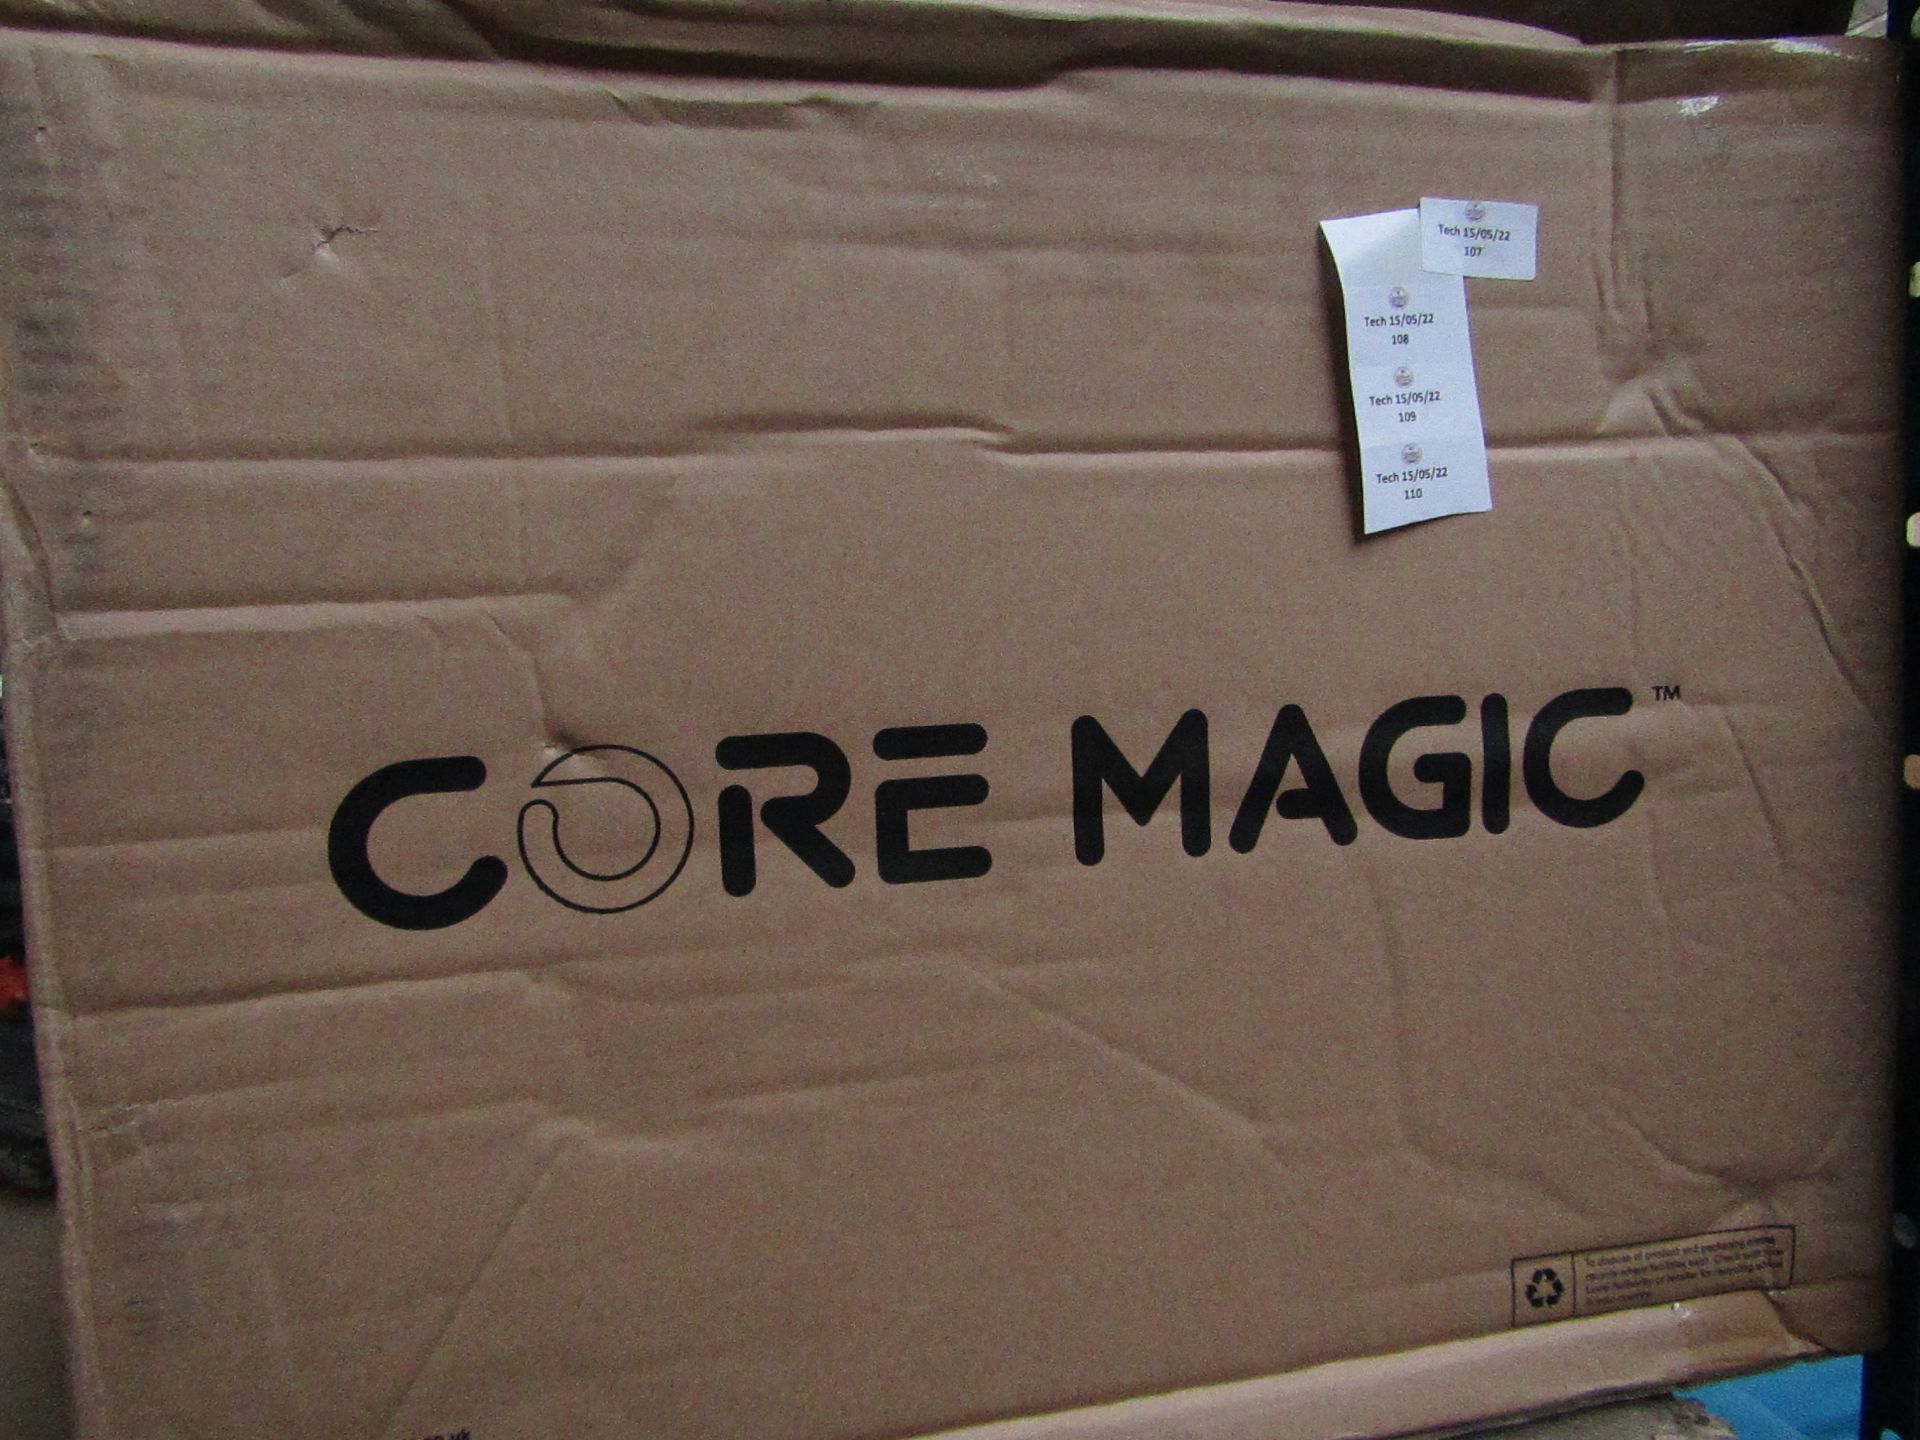 | 1X | CORE MAGIC EXERCISE MACHINE | REFURBISHED & BOXED | NO ONLINE RESALE ALLOWED | RRP £59.99 |